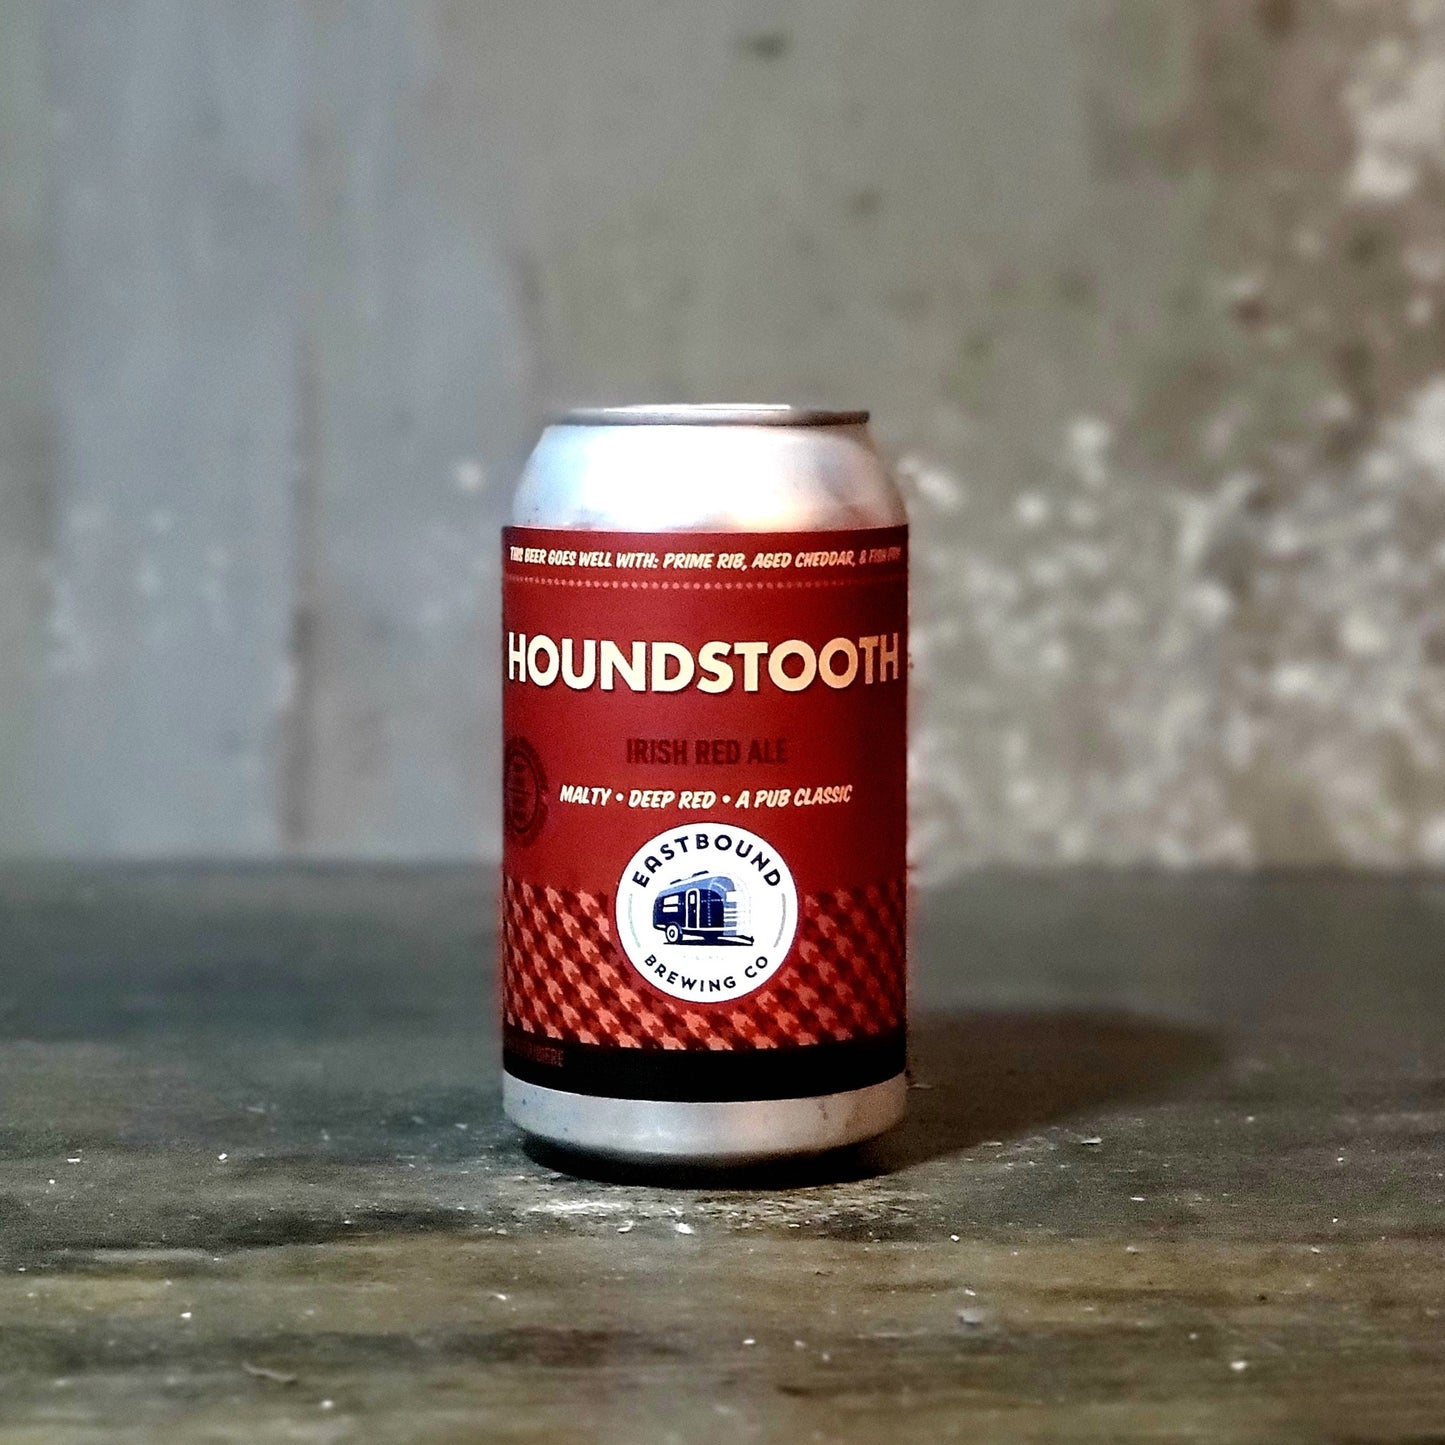 Eastbound "Houndstooth" Irish Red Ale